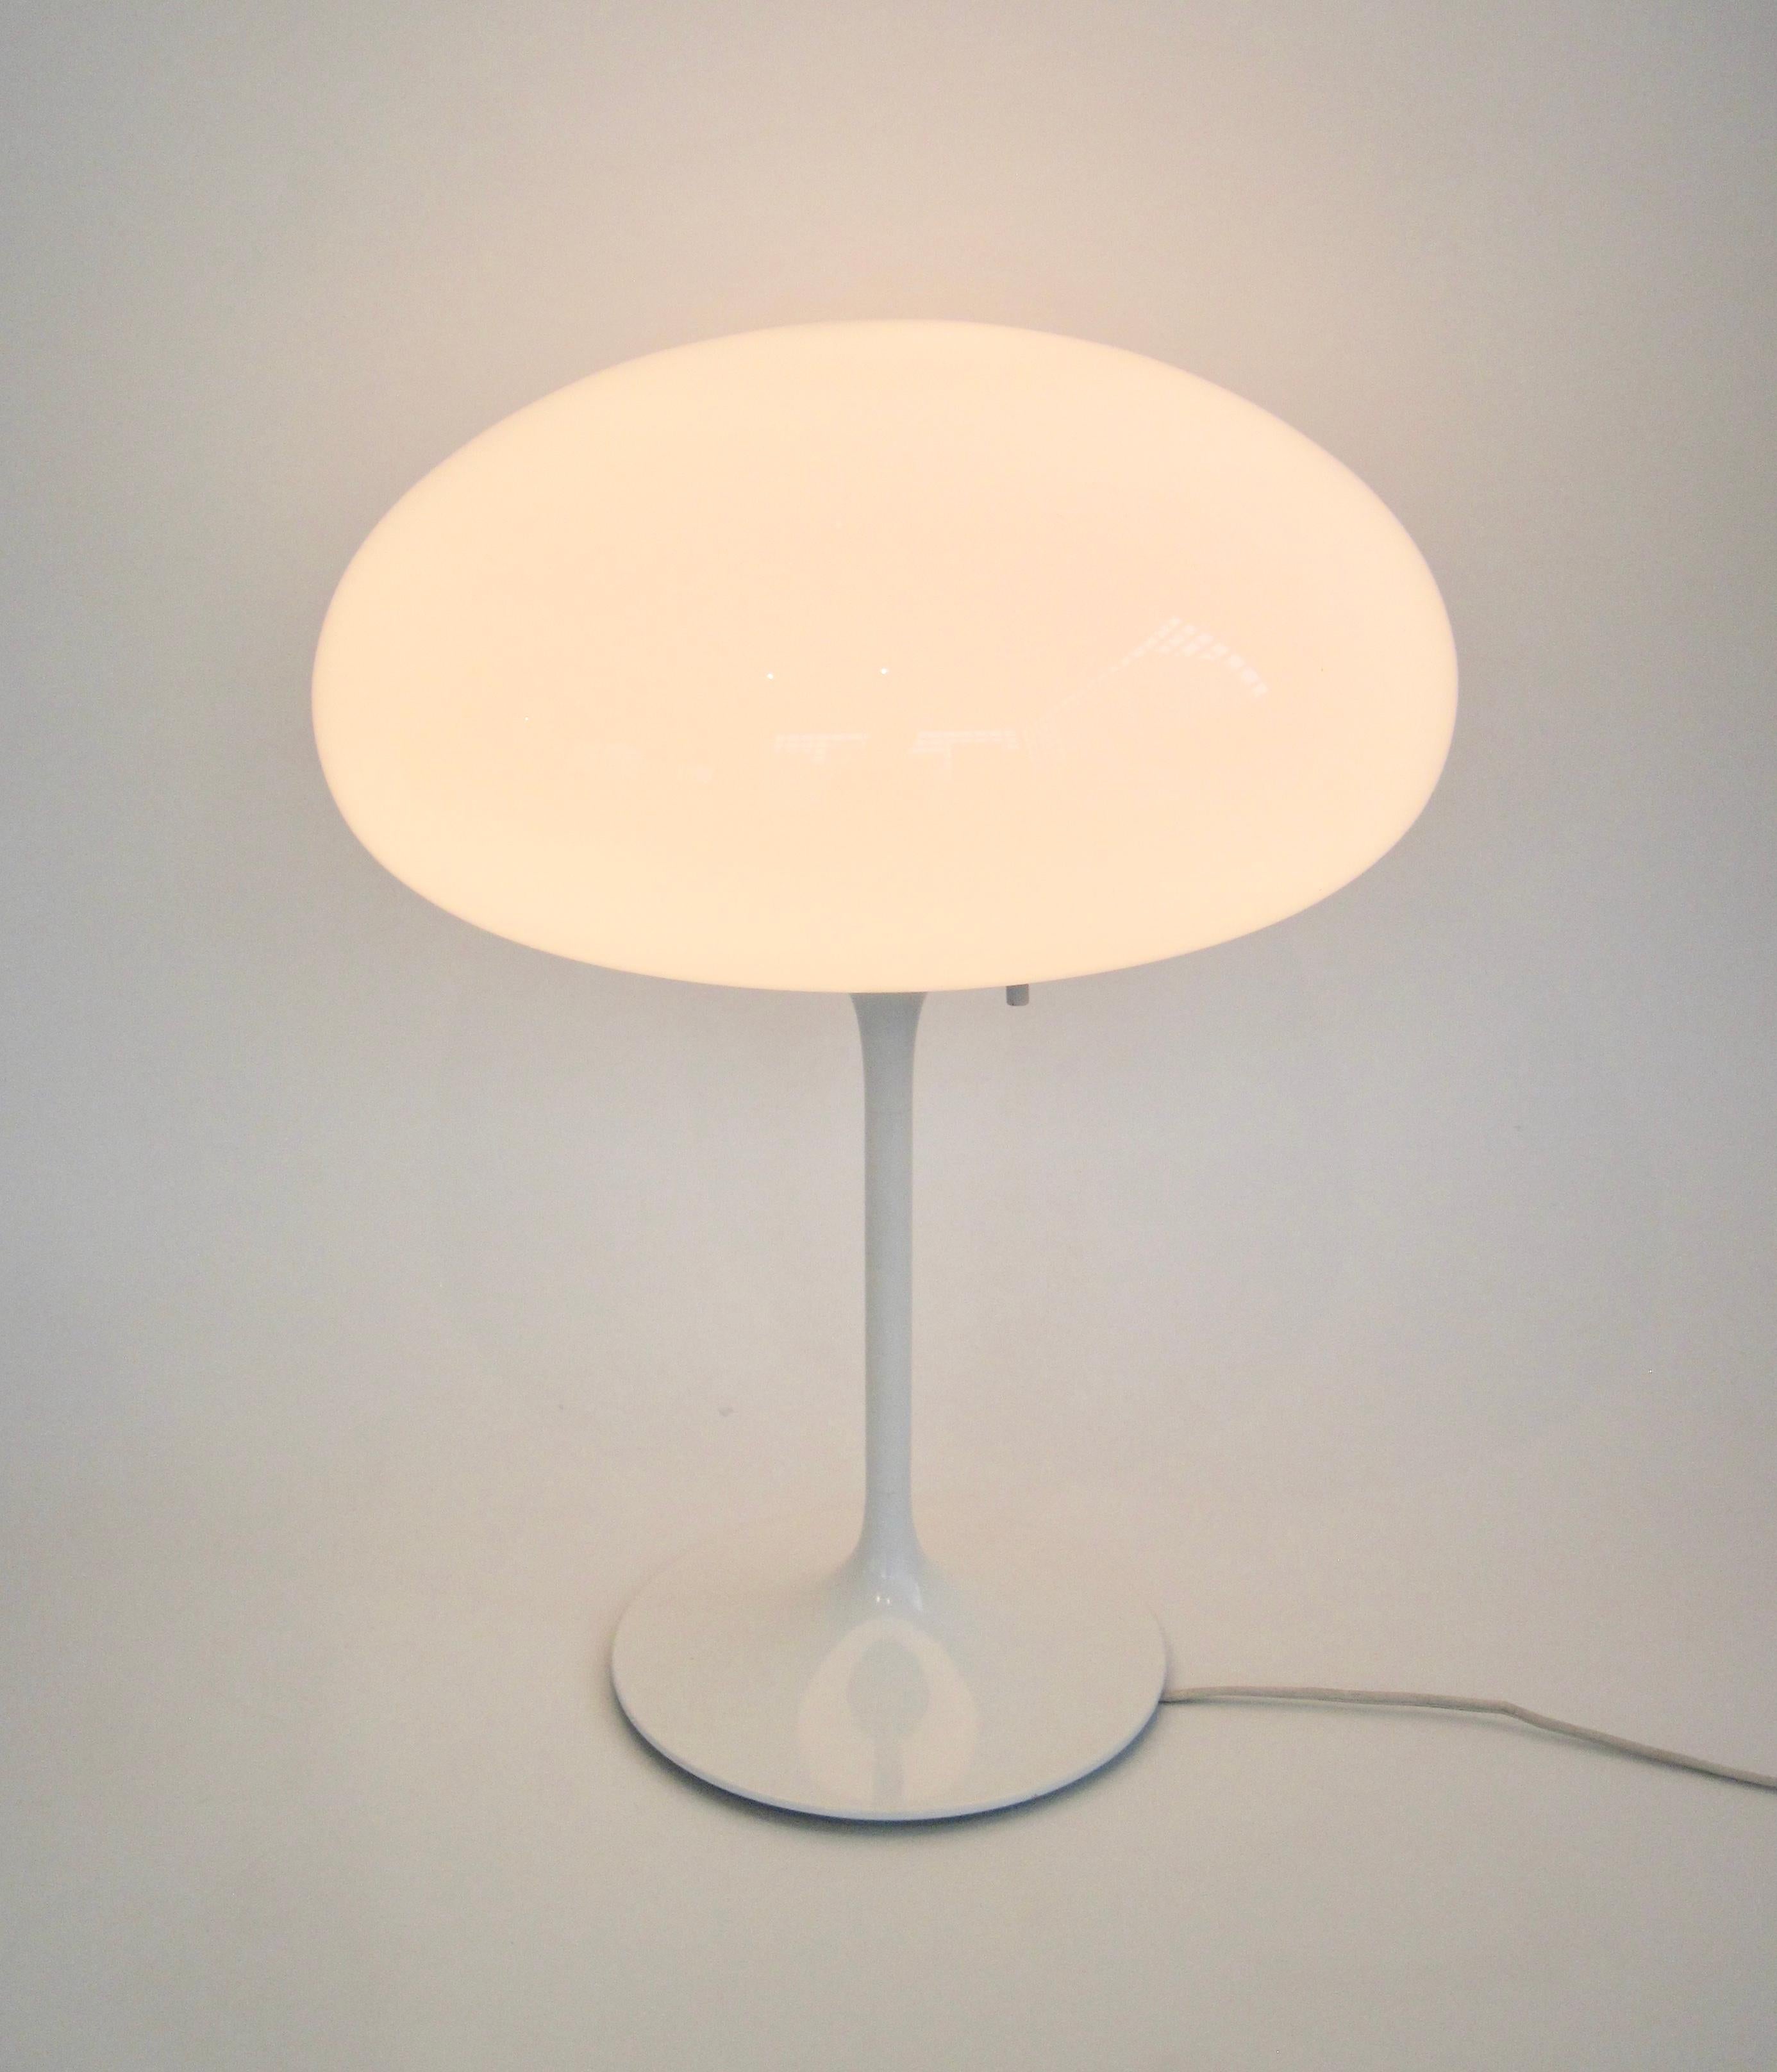 Two lamps available. Mushroom top Stemlite table lamp designed by Bill Curry for Design Line in baked white enamel, with discrete vertical switch and three-way socket. A handblown glass globe sits atop the base to complete the mushroom look.  